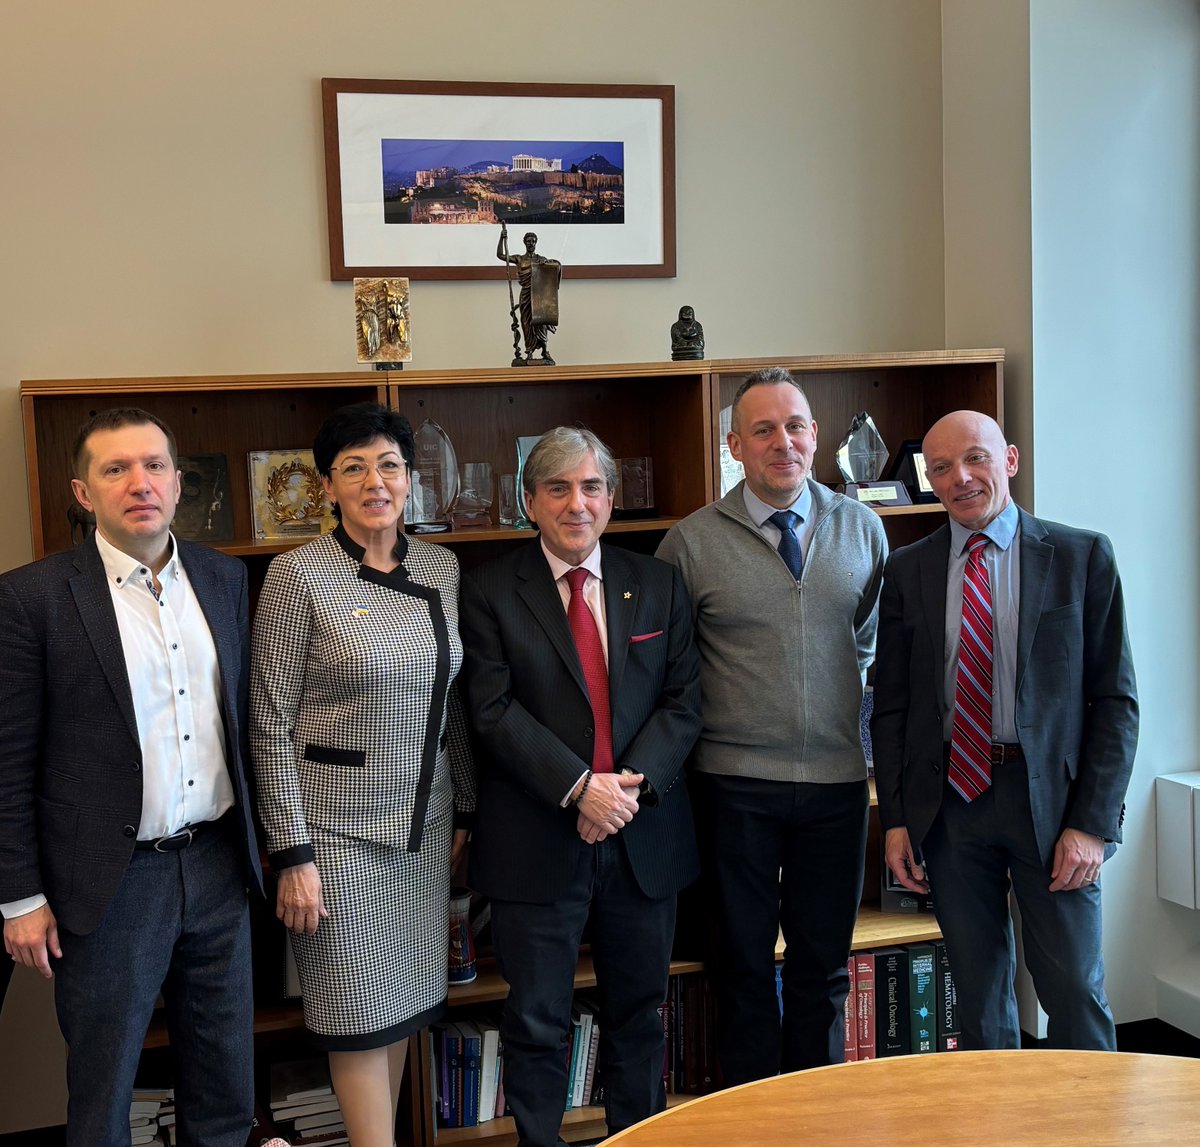 Meeting with the Director of the National Cancer Institute of Ukraine today, Dr. Olena Yefimenko, & the Ukrainian delegation visiting us today @LurieCancer. Discussed the potential of a partnership to develop a cancer screening program in Kiev. @NorthwesternMed @NUFeinbergMed